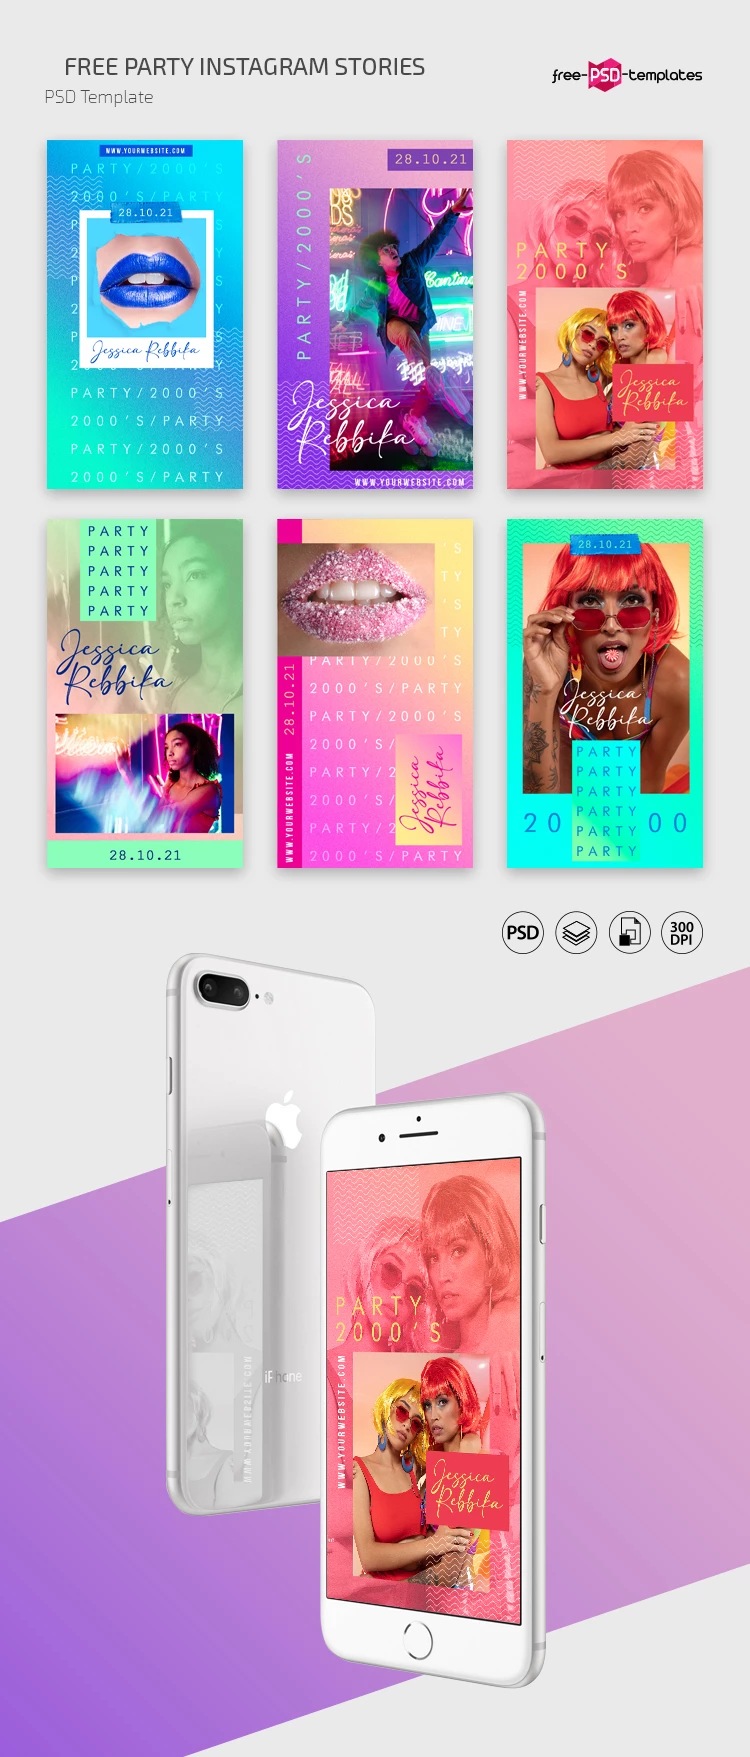 6 Free Party Instagram Stories PSD Templates